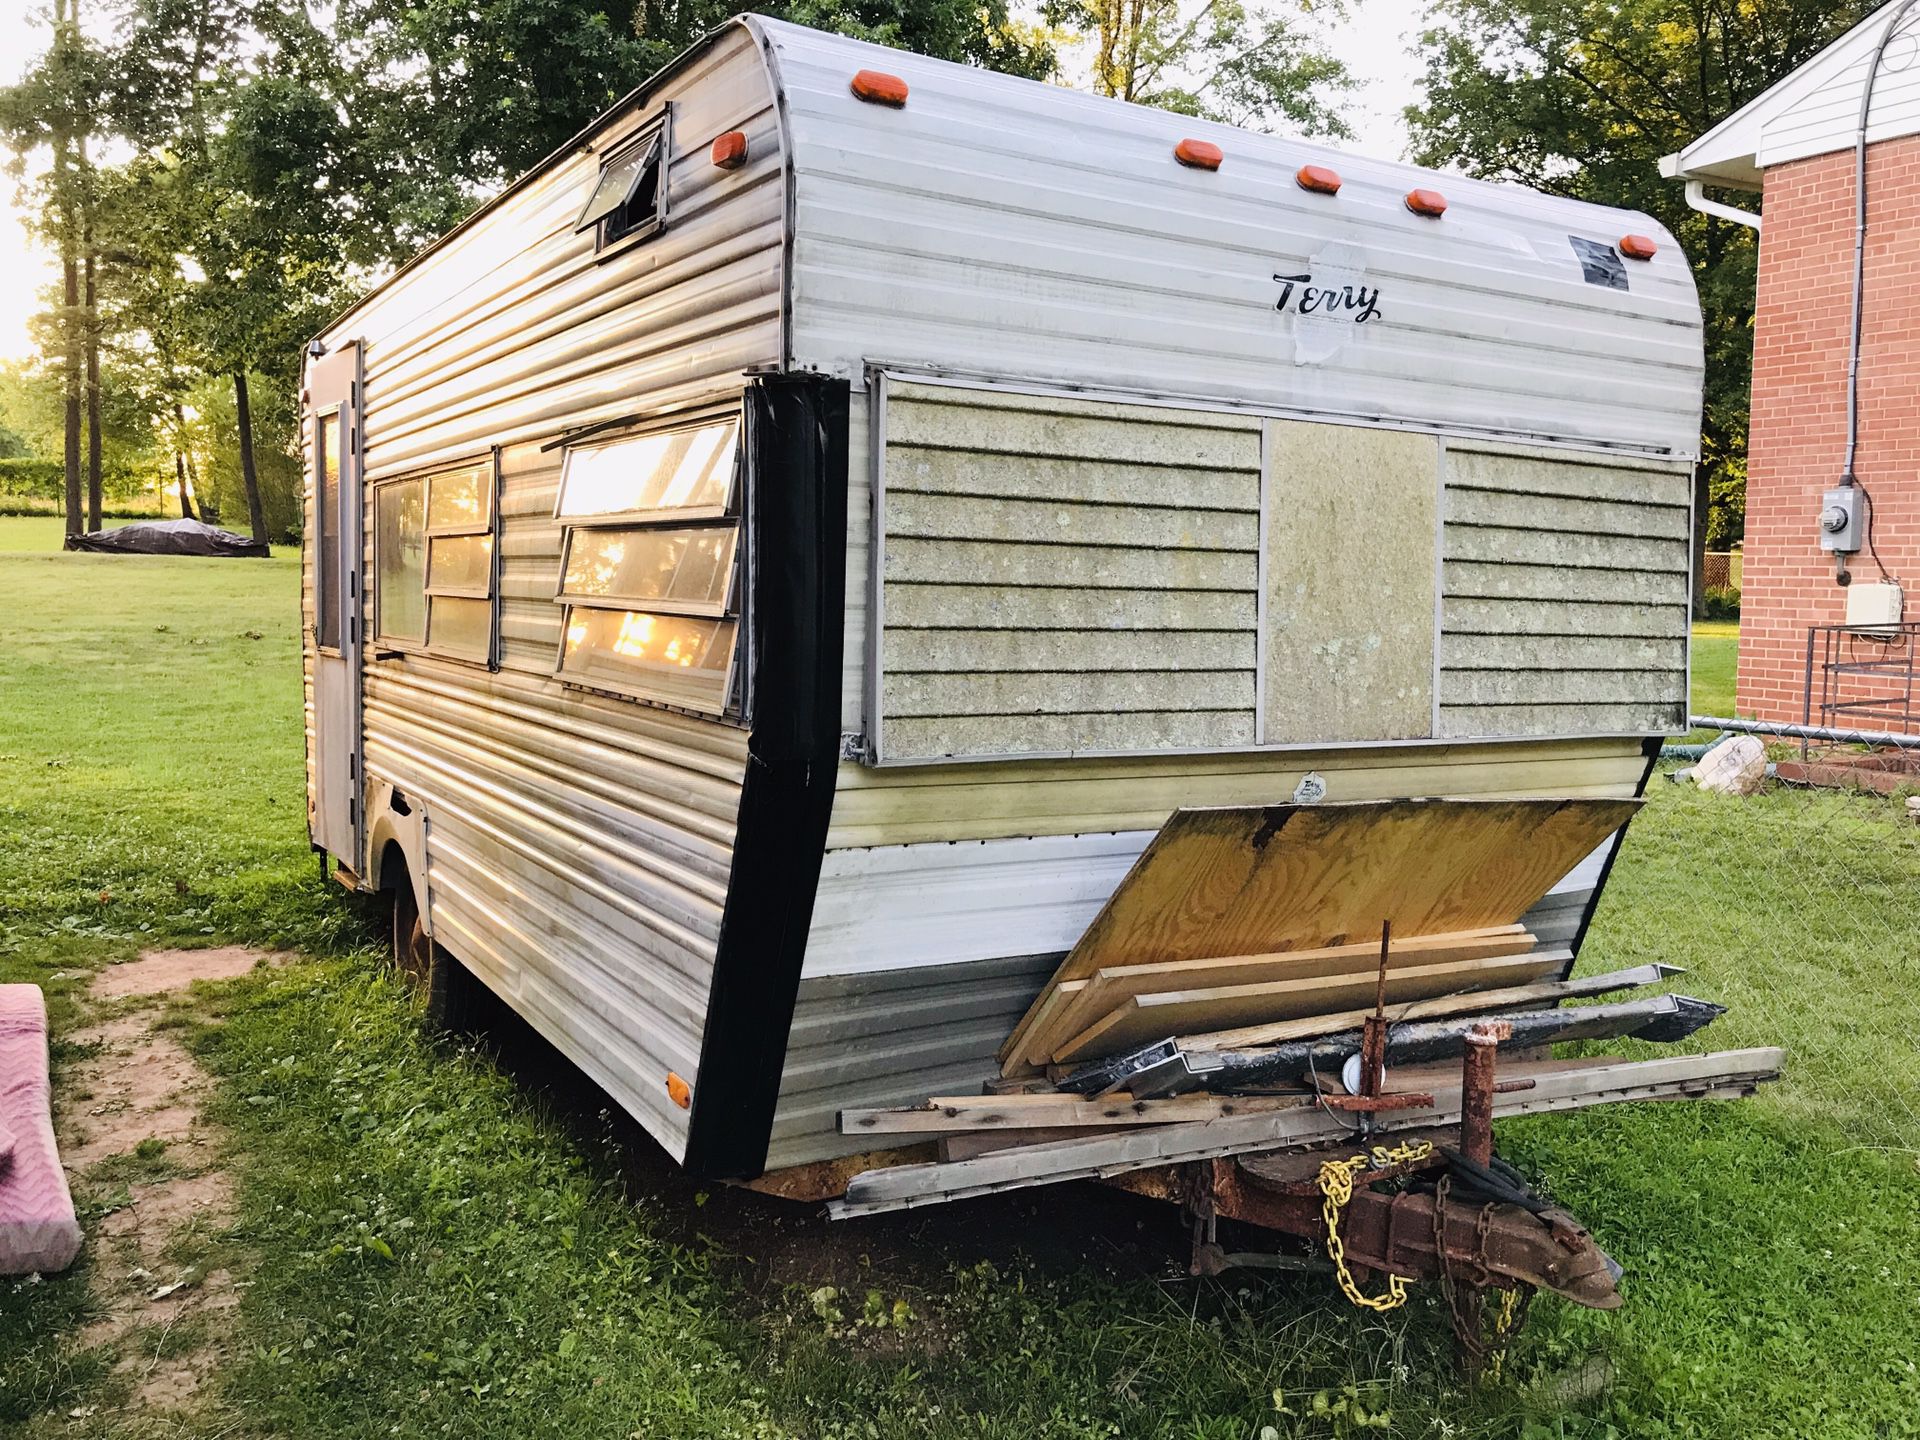 Terry’s Travel Trailer 1971